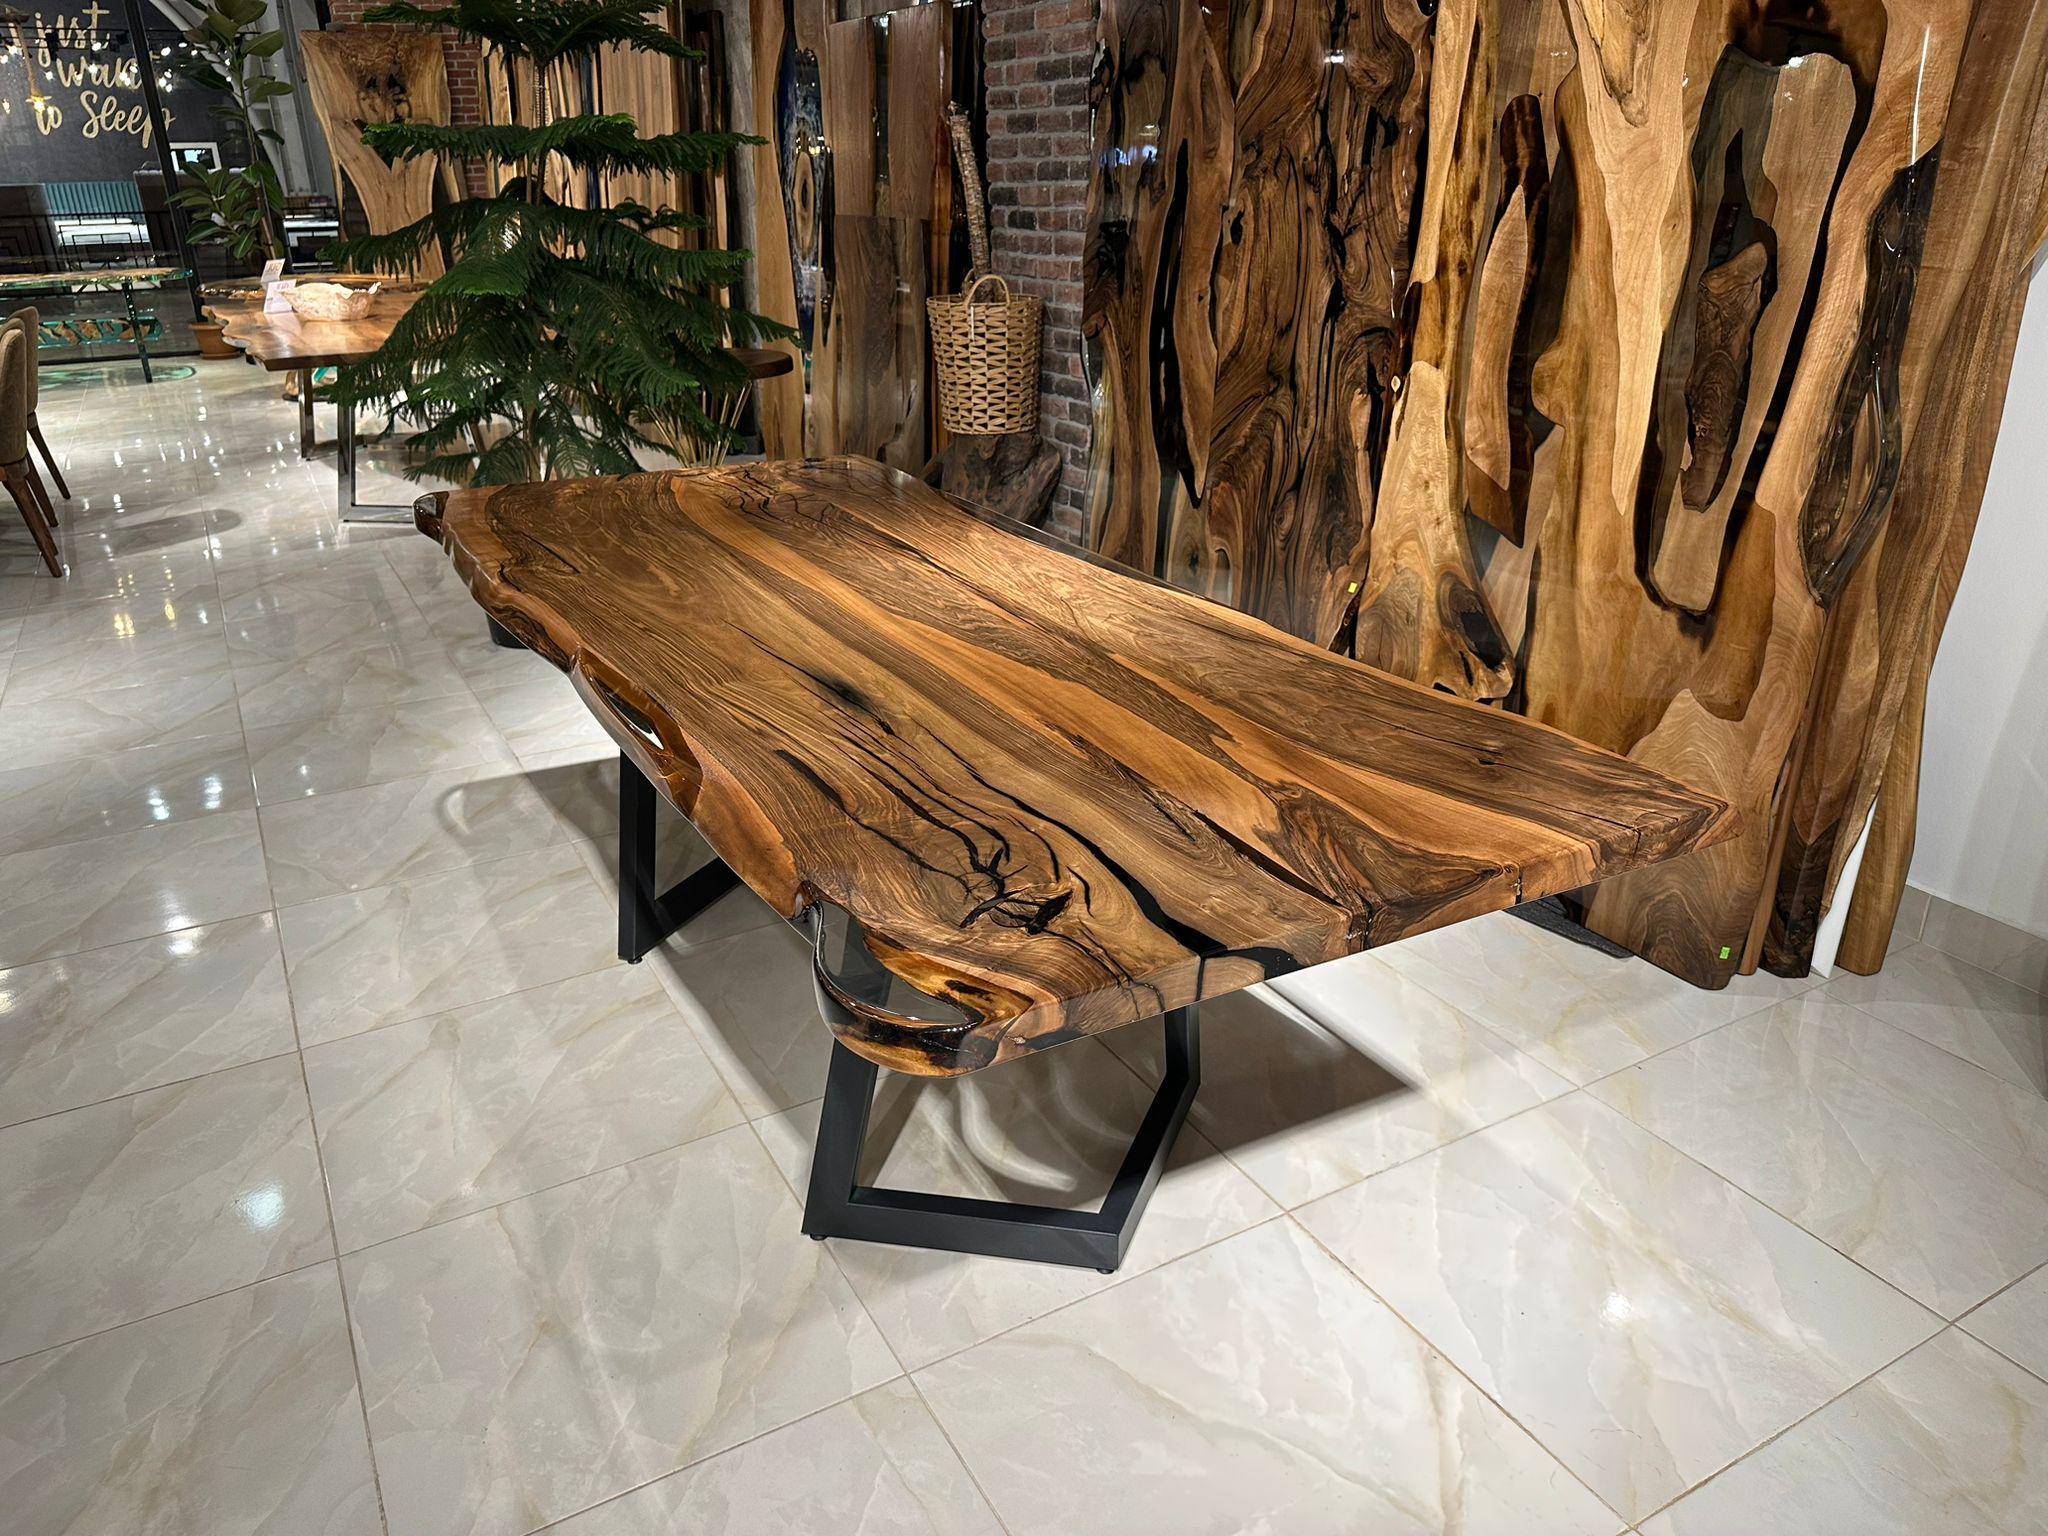 Custom Walnut Live Edge Epoxy Resin Conference Room Table 

This table is made of Walnut Wood. The grains and texture of the wood describe what a natural walnut woods looks like.
It can be used as a dining table or as a conference table. Suitable